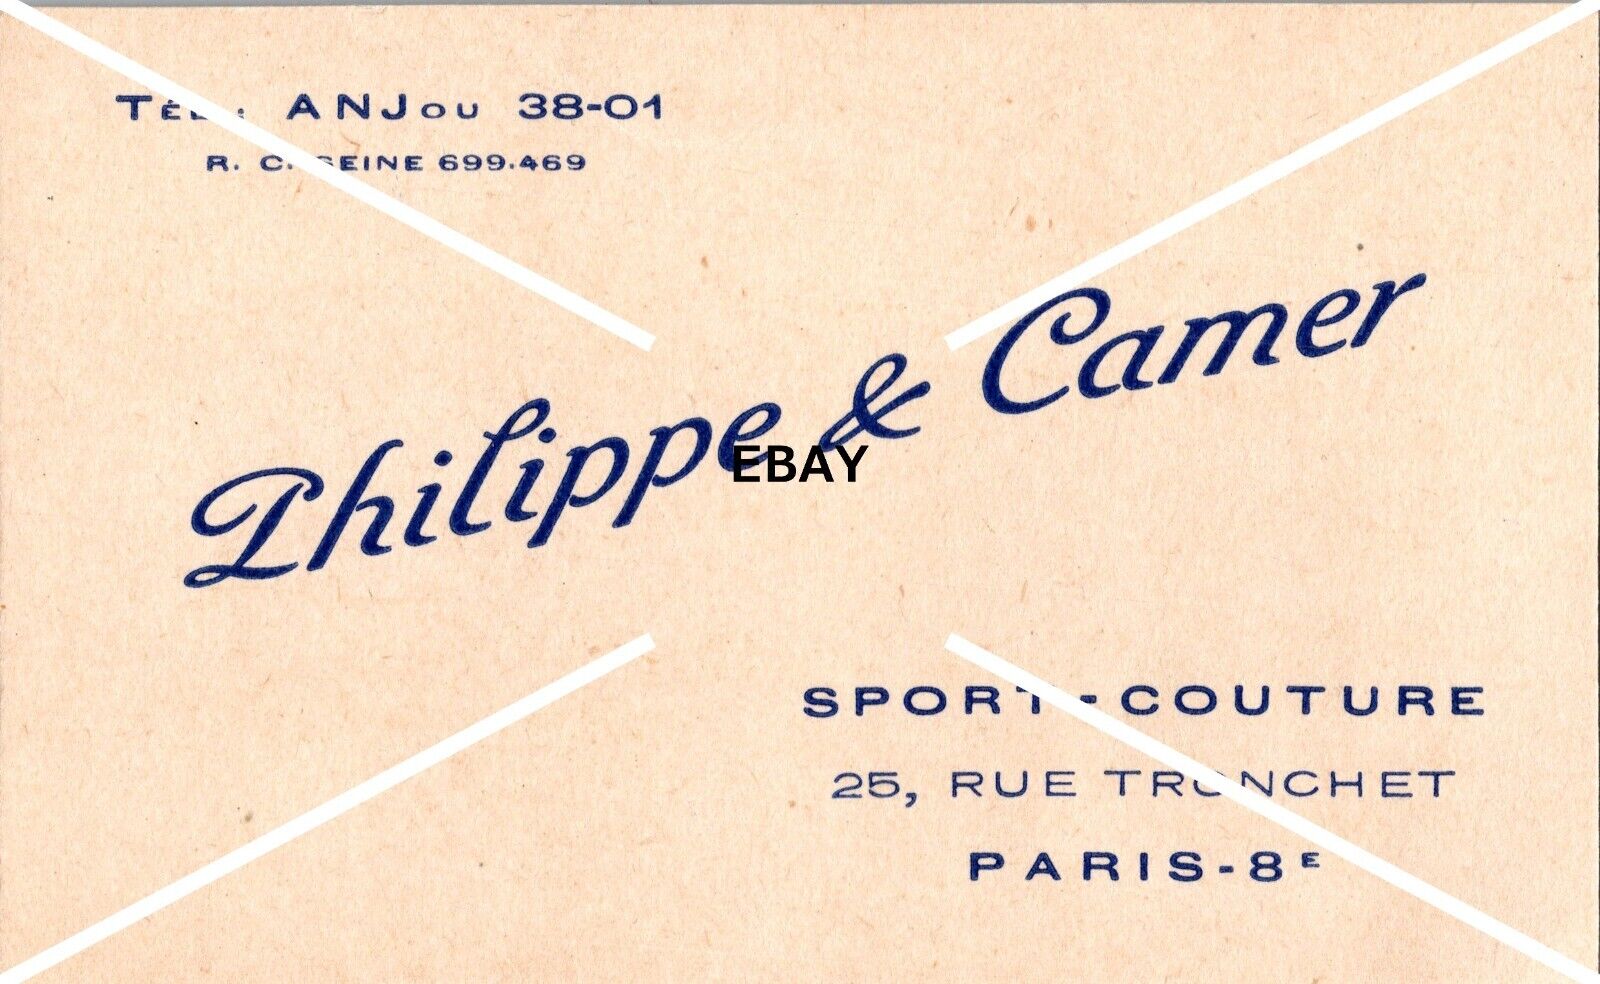 VTG Business Card Philippe & Camer Sport Couture Paris France